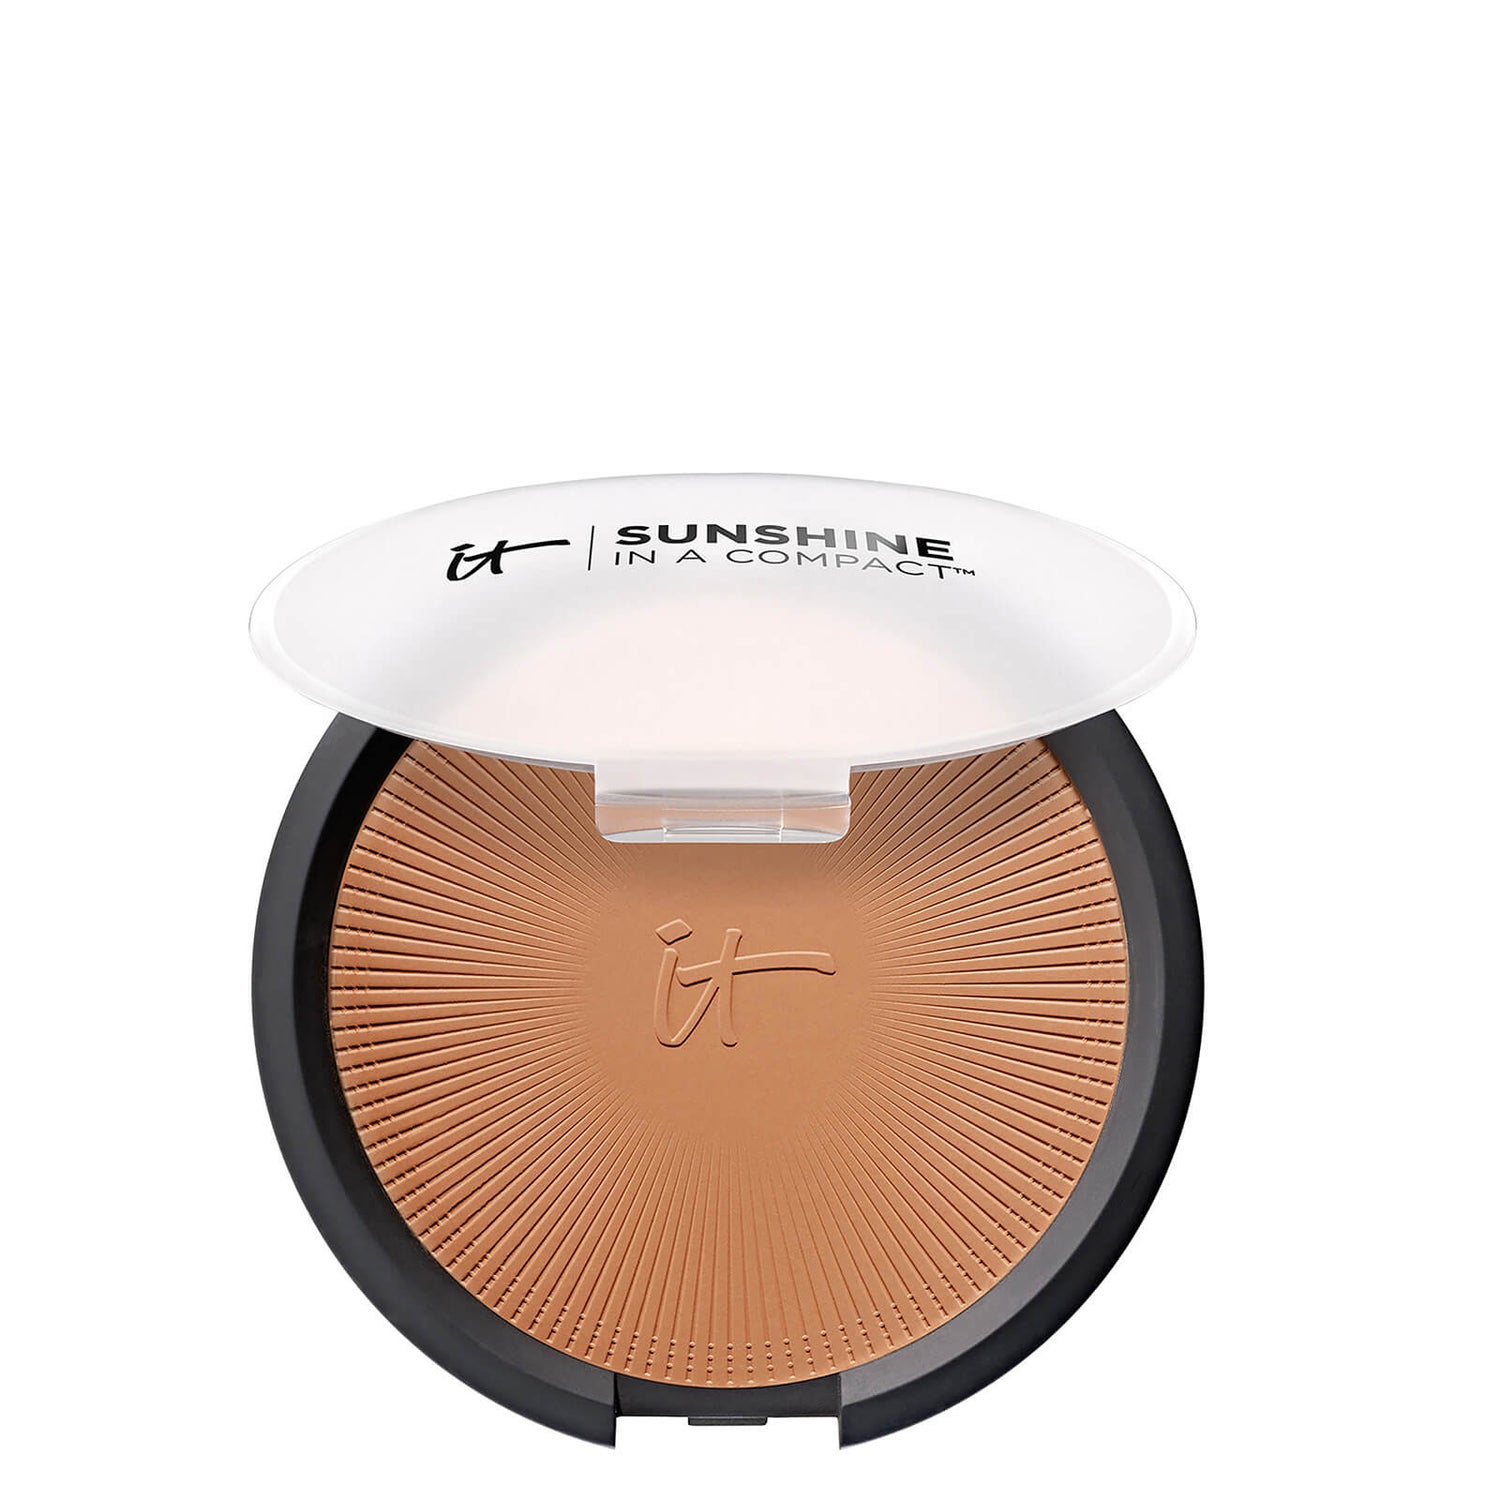 Sunshine in a Compact - Warmth 16,17 g IT Cosmetics